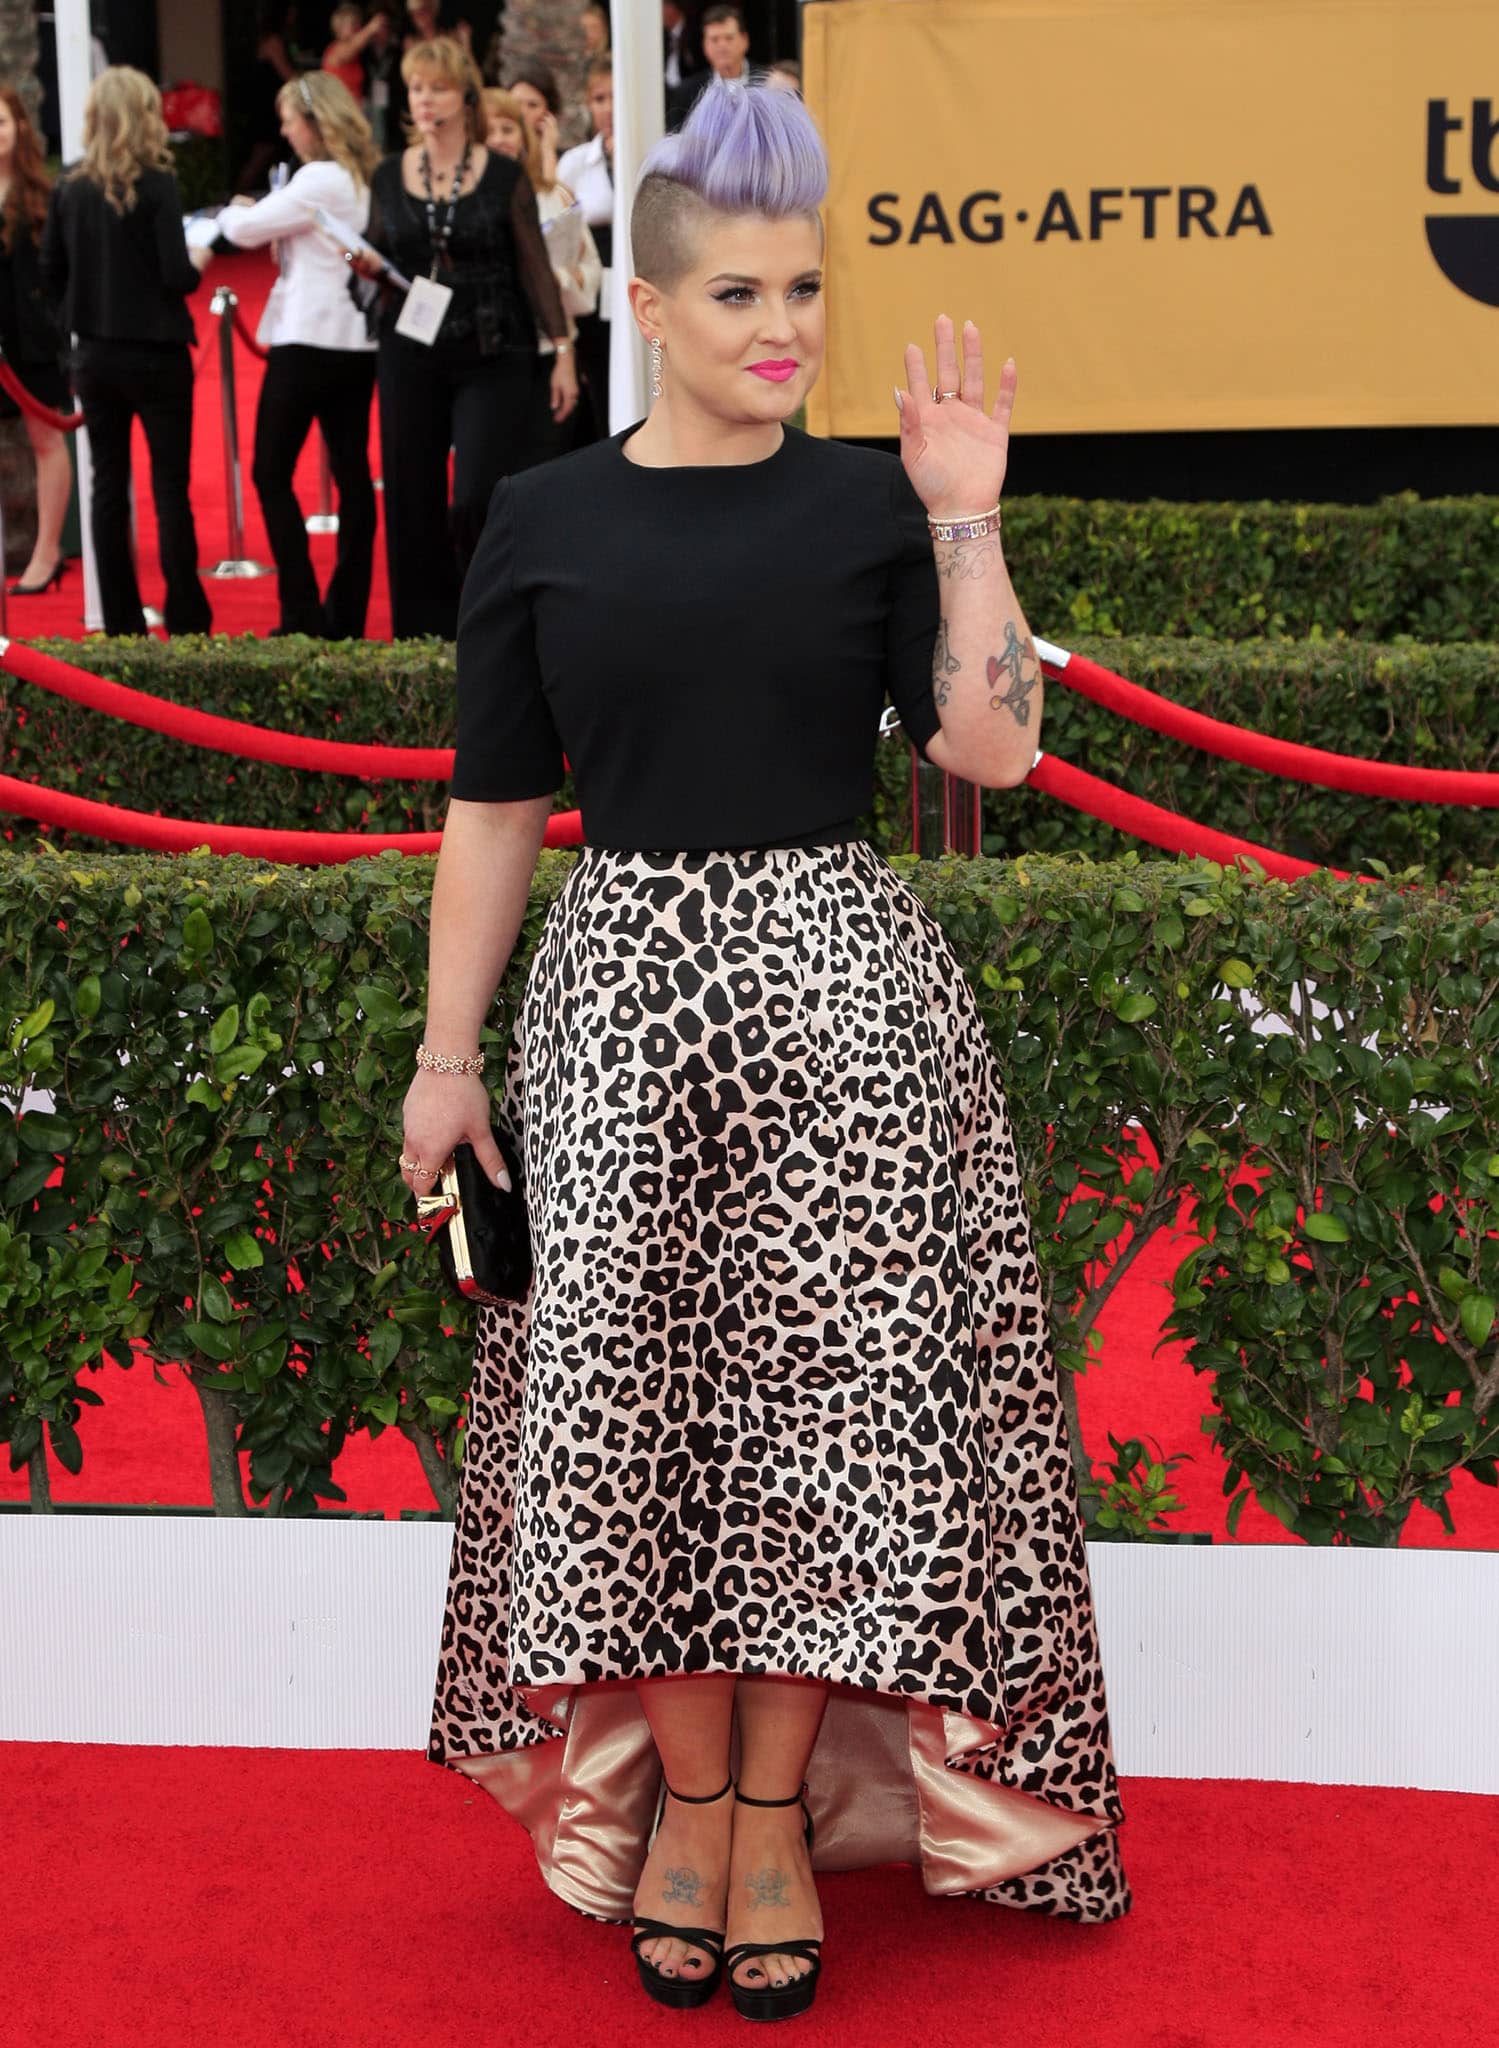 Kelly Osbourne is best known for being one of the panelists on the E! series Fashion Police from 2010 to 2015